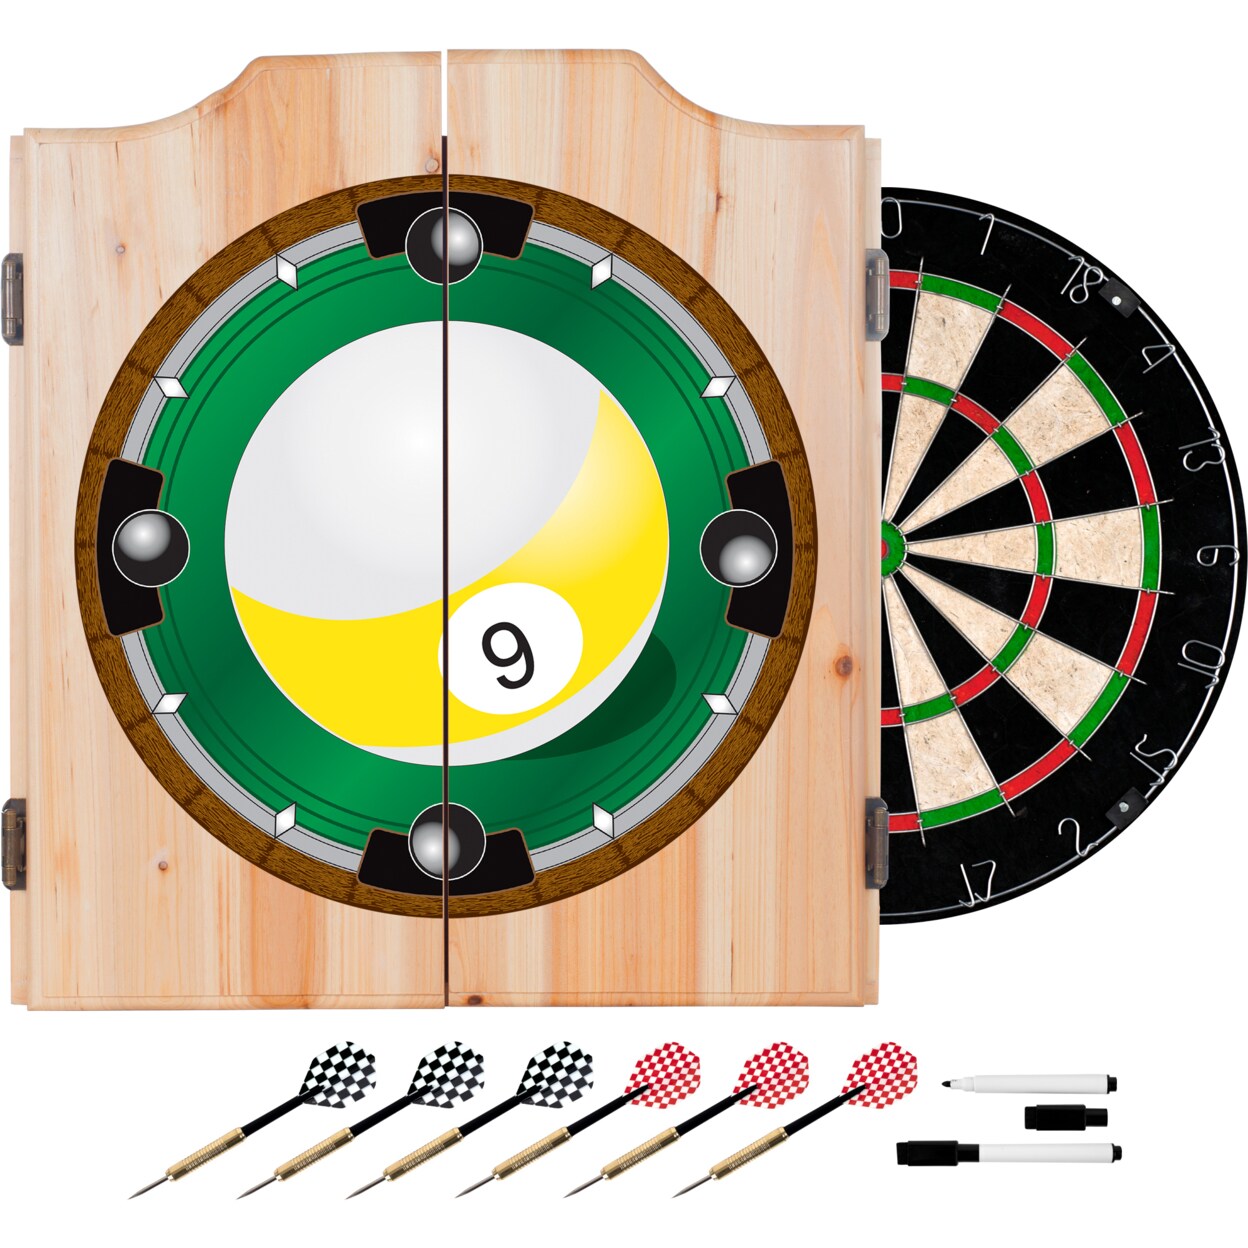 ADG SOURCE 9-Ball Dart Cabinet includes Darts and Board